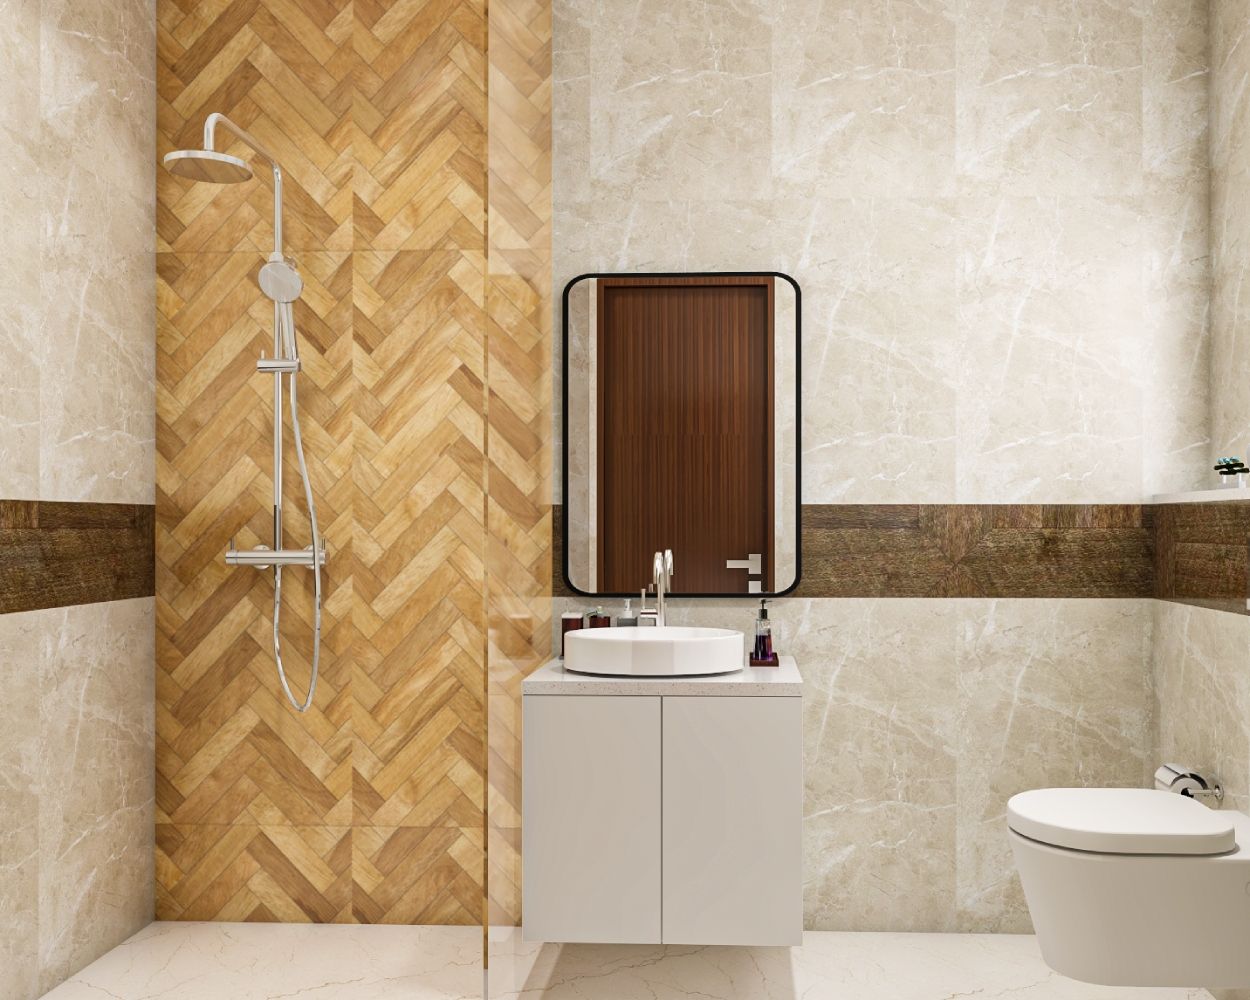 Contemporary Beige And Brown Bathroom Design With Curved Mirror